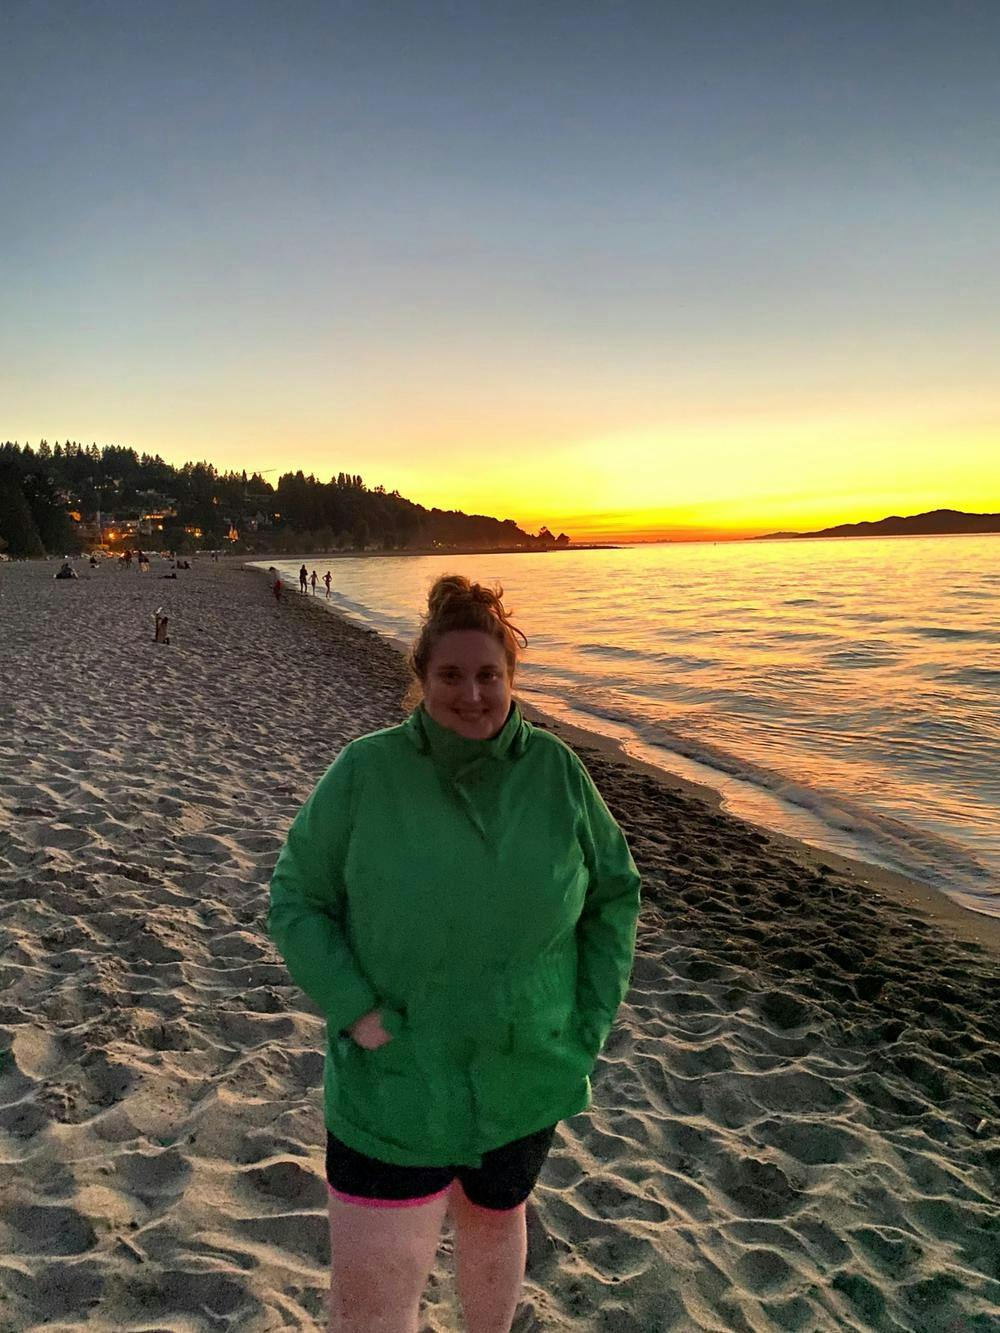 Katie standing on a beach in front of a sunset over the water